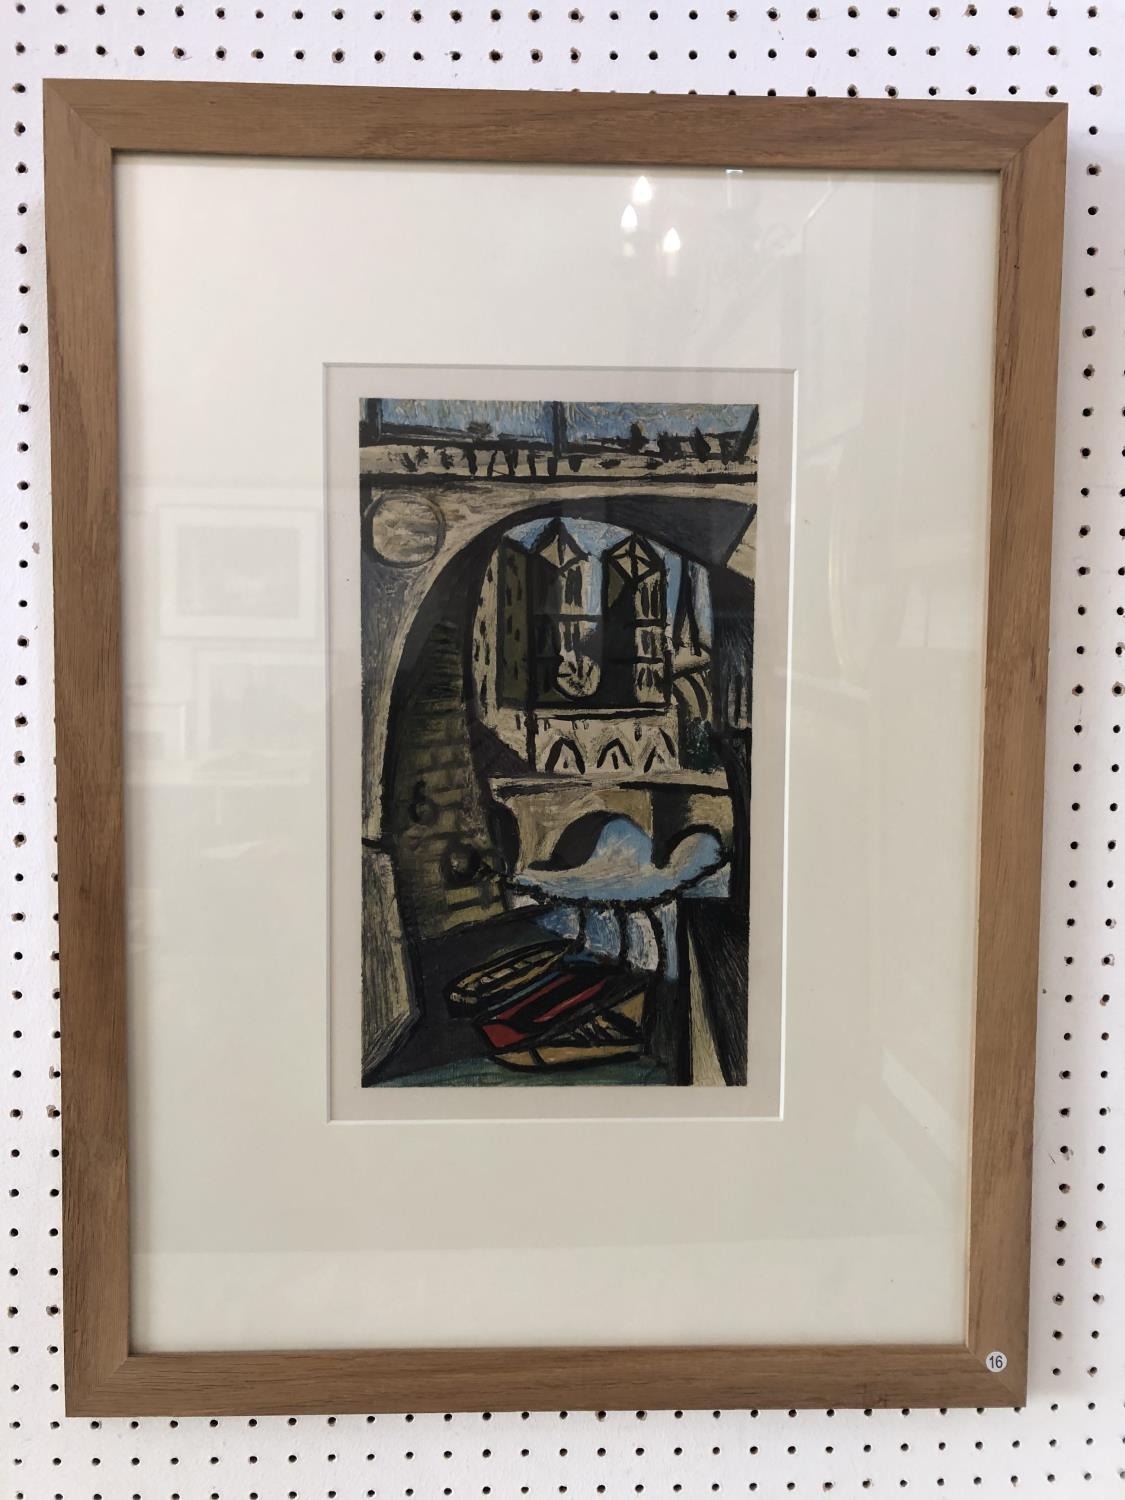 After Pablo Picasso (1881-1973) - 'Notre-Dame', lithograph after Picasso from the suite